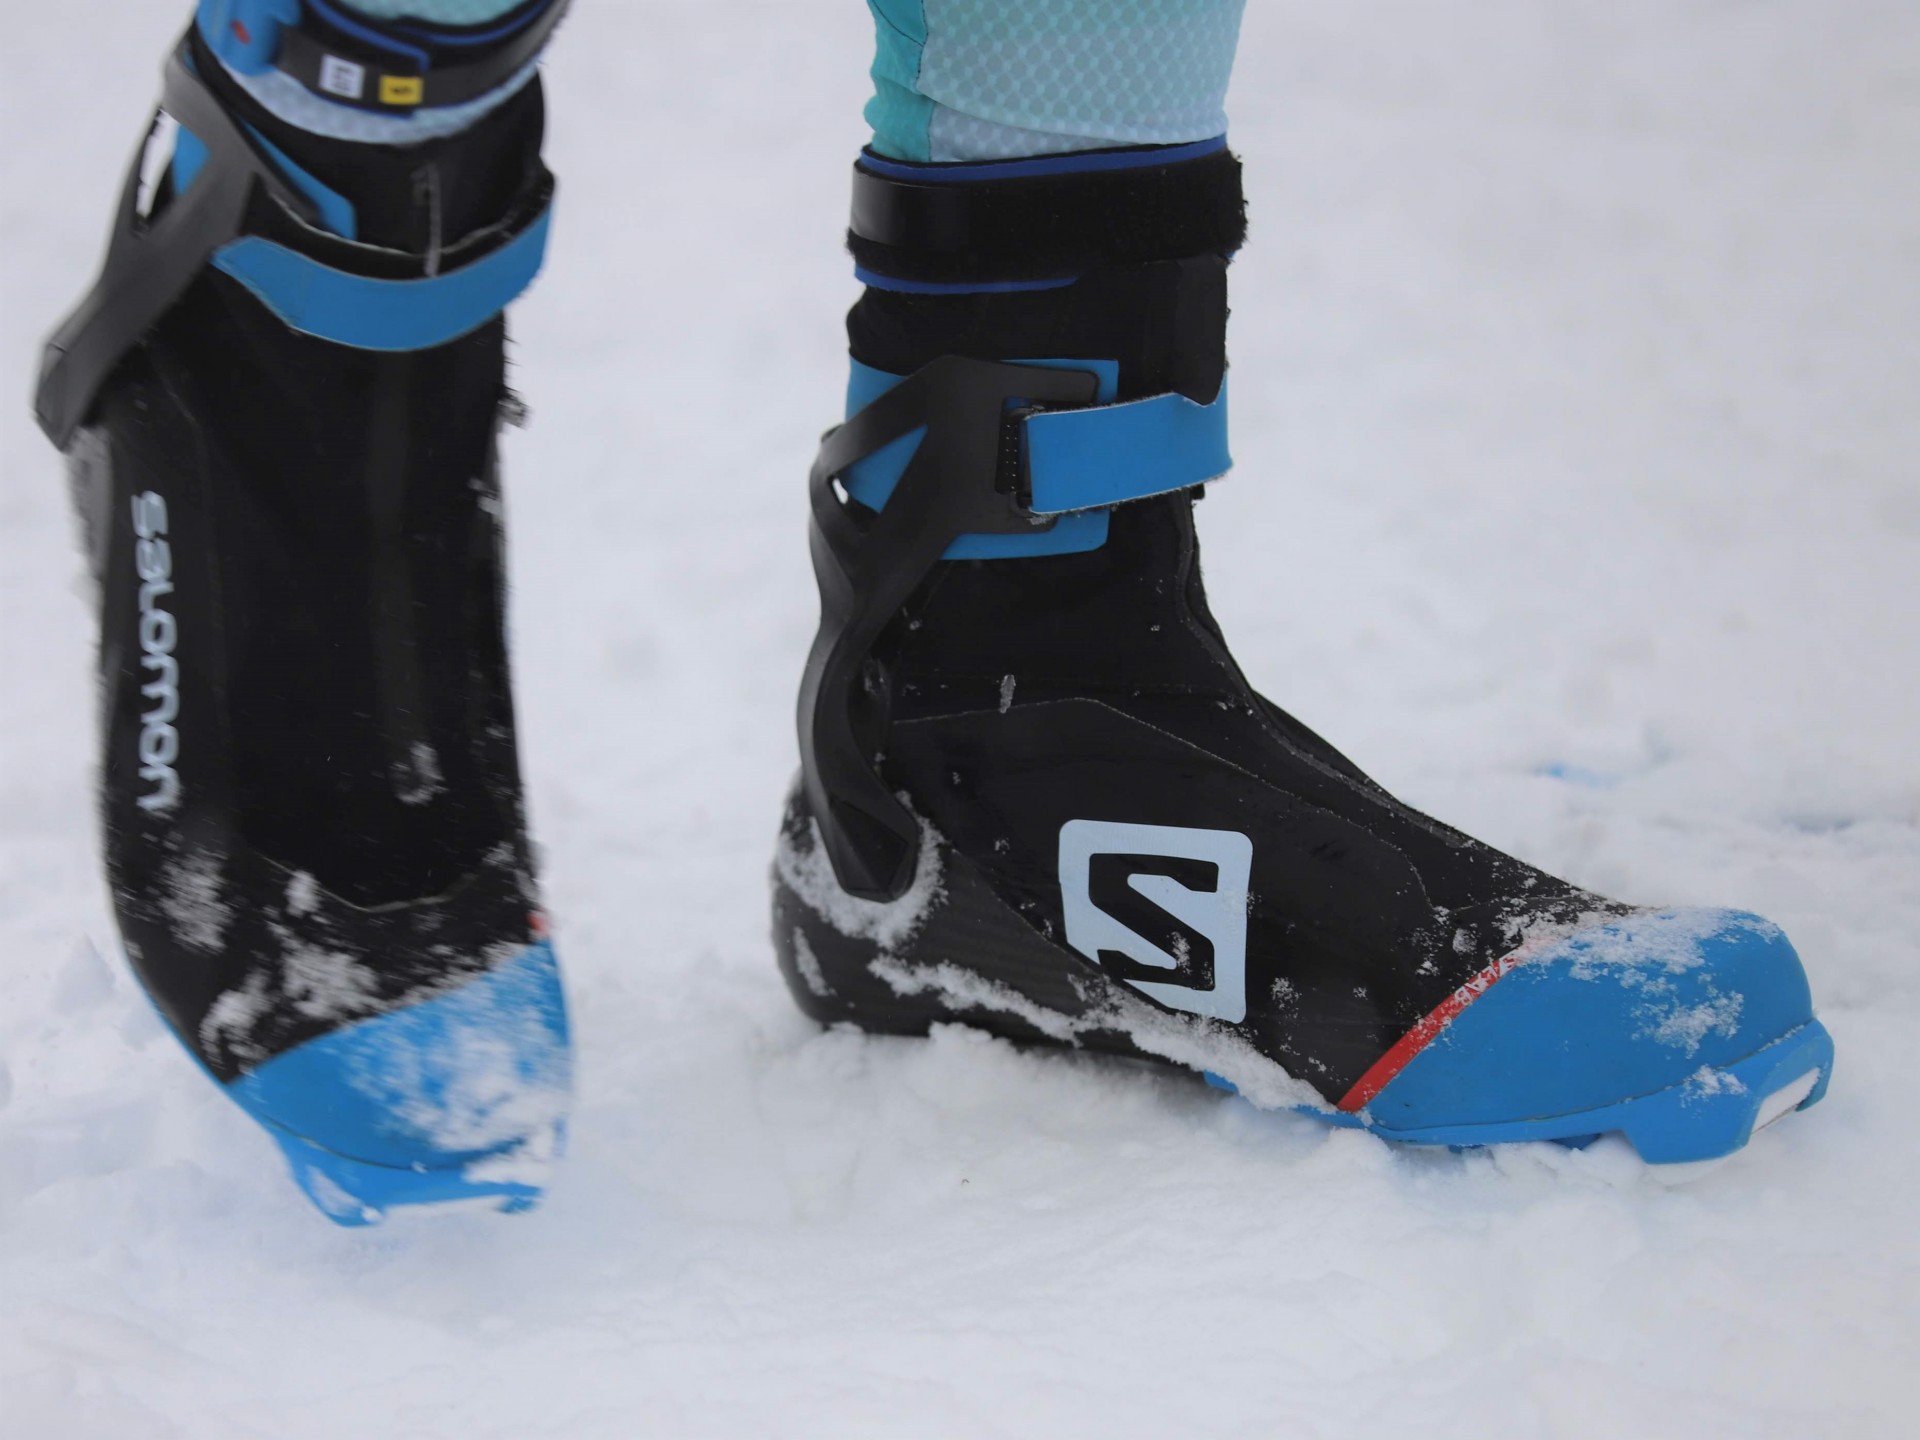 New Salomon S/LAB Carbon Skate Boots Are Here! First Proper Look ...